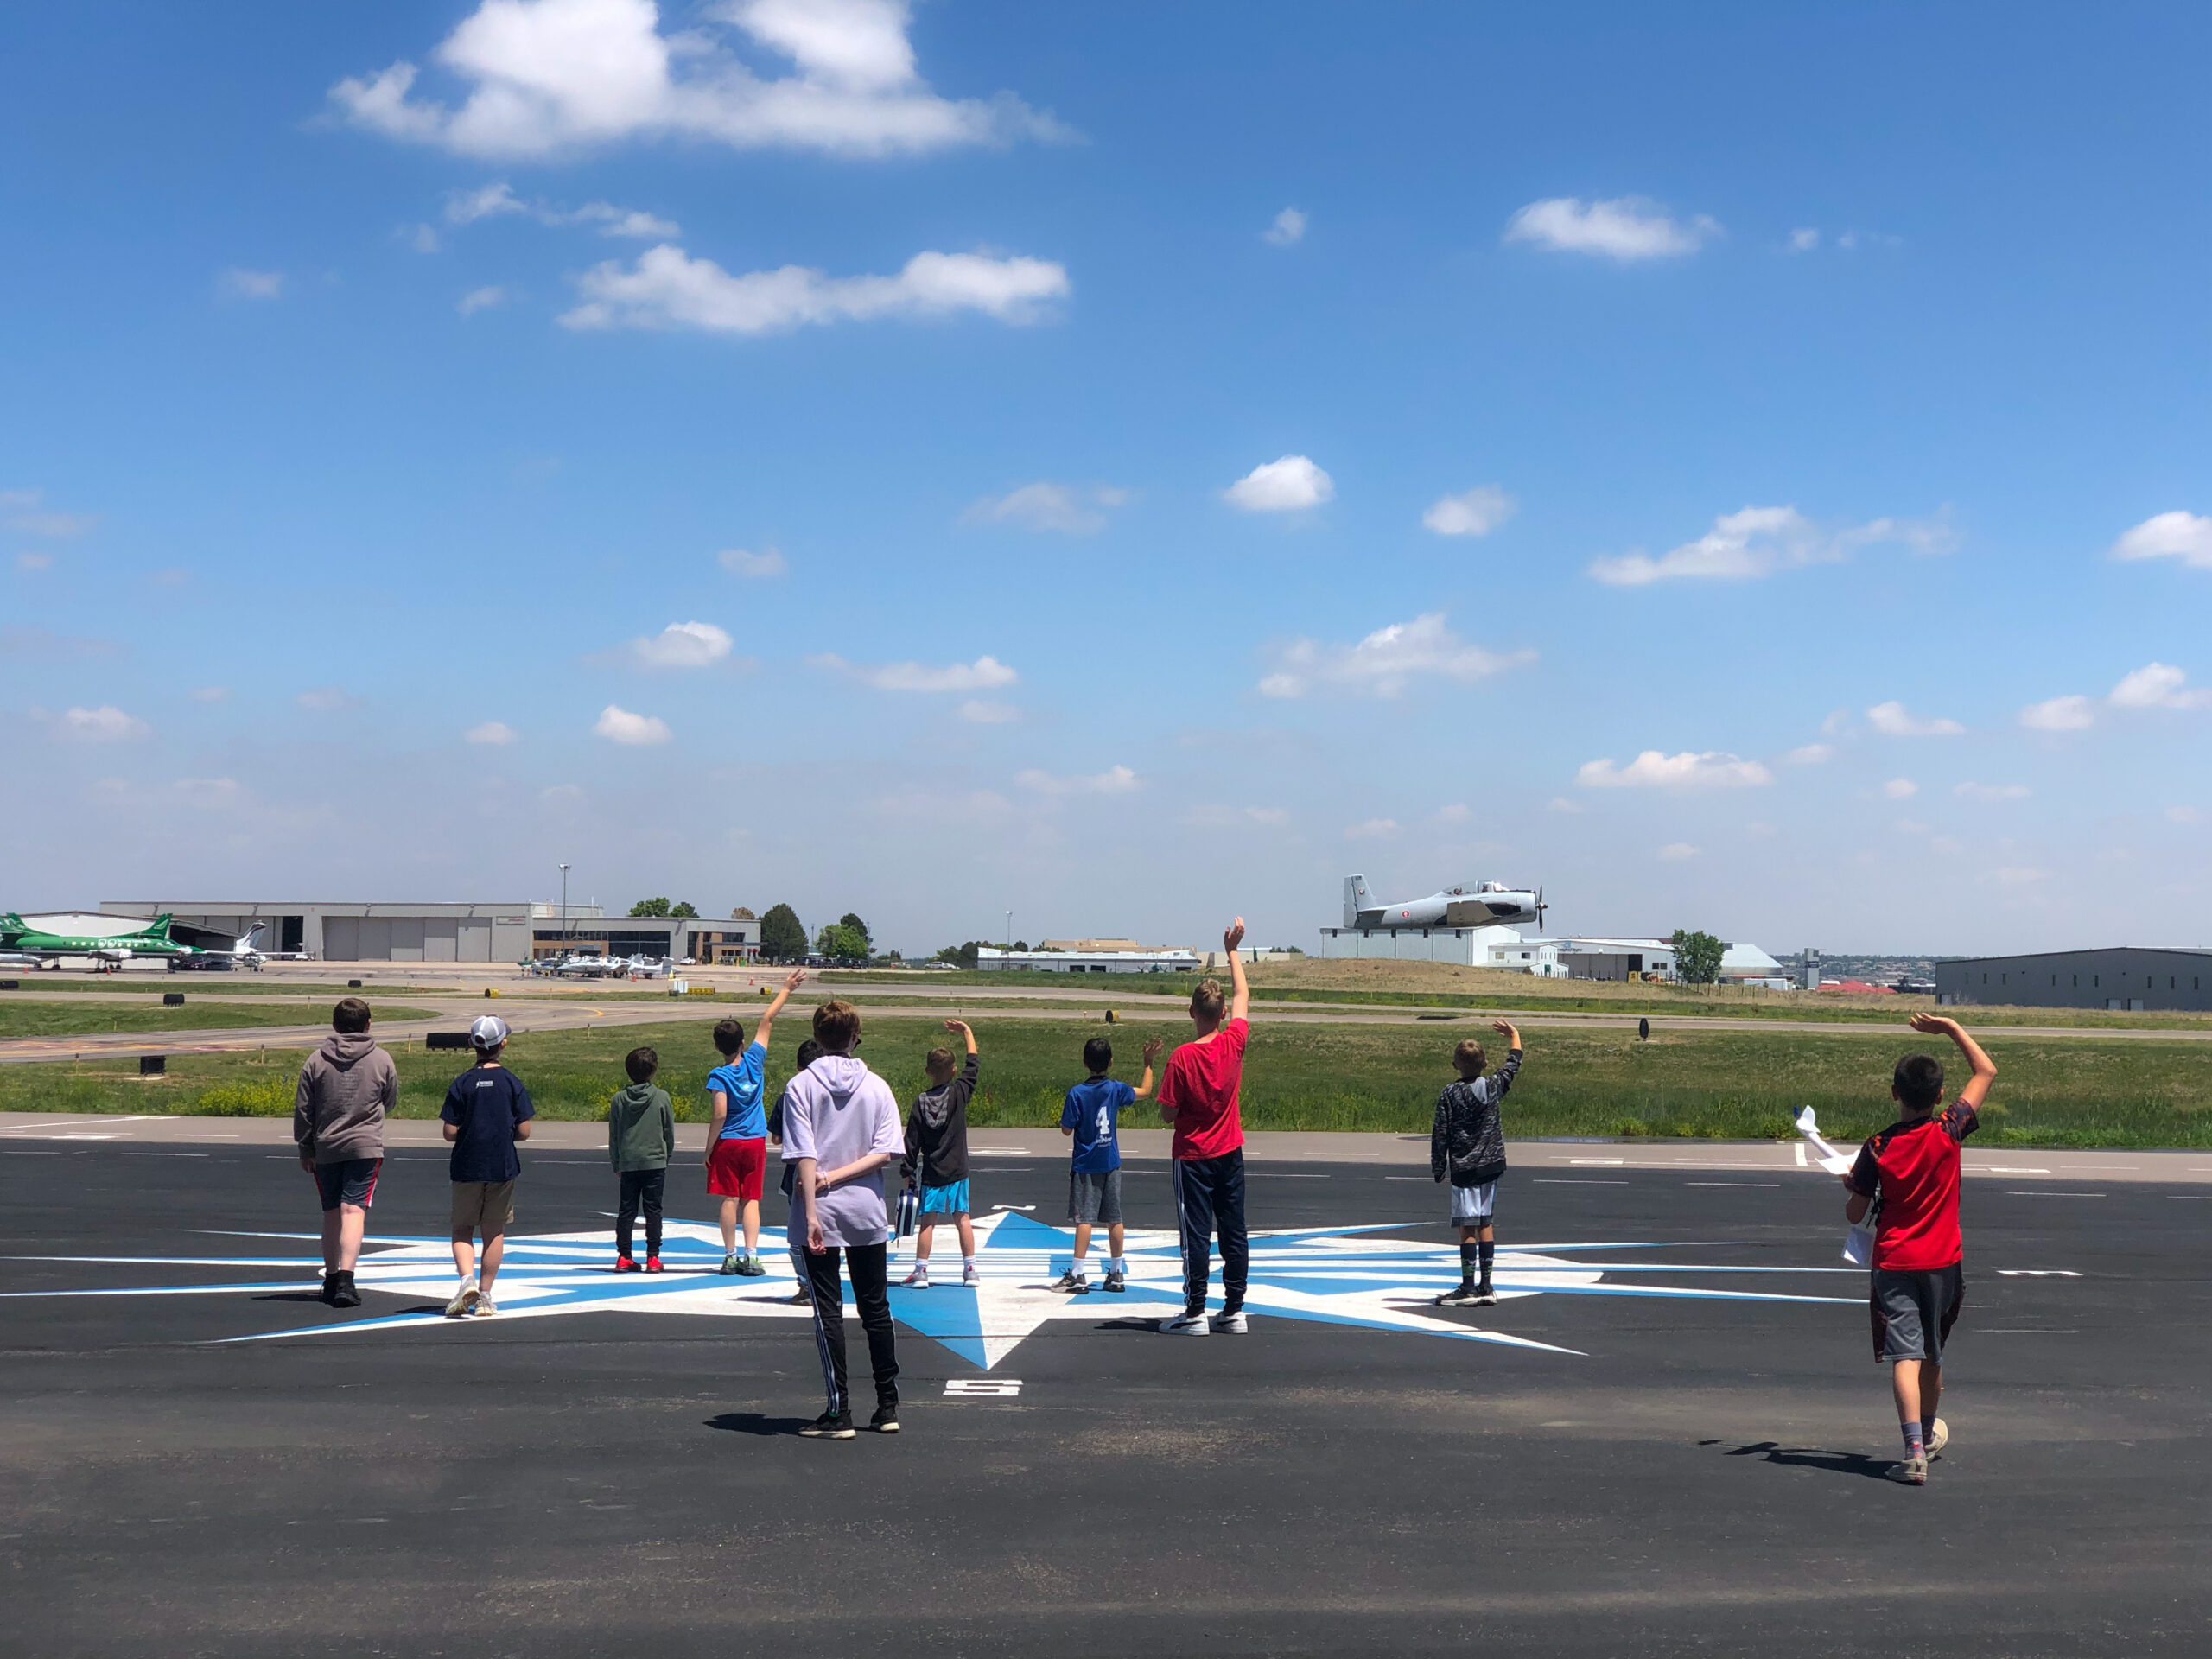 Students waving as an airplane takes off from the runway